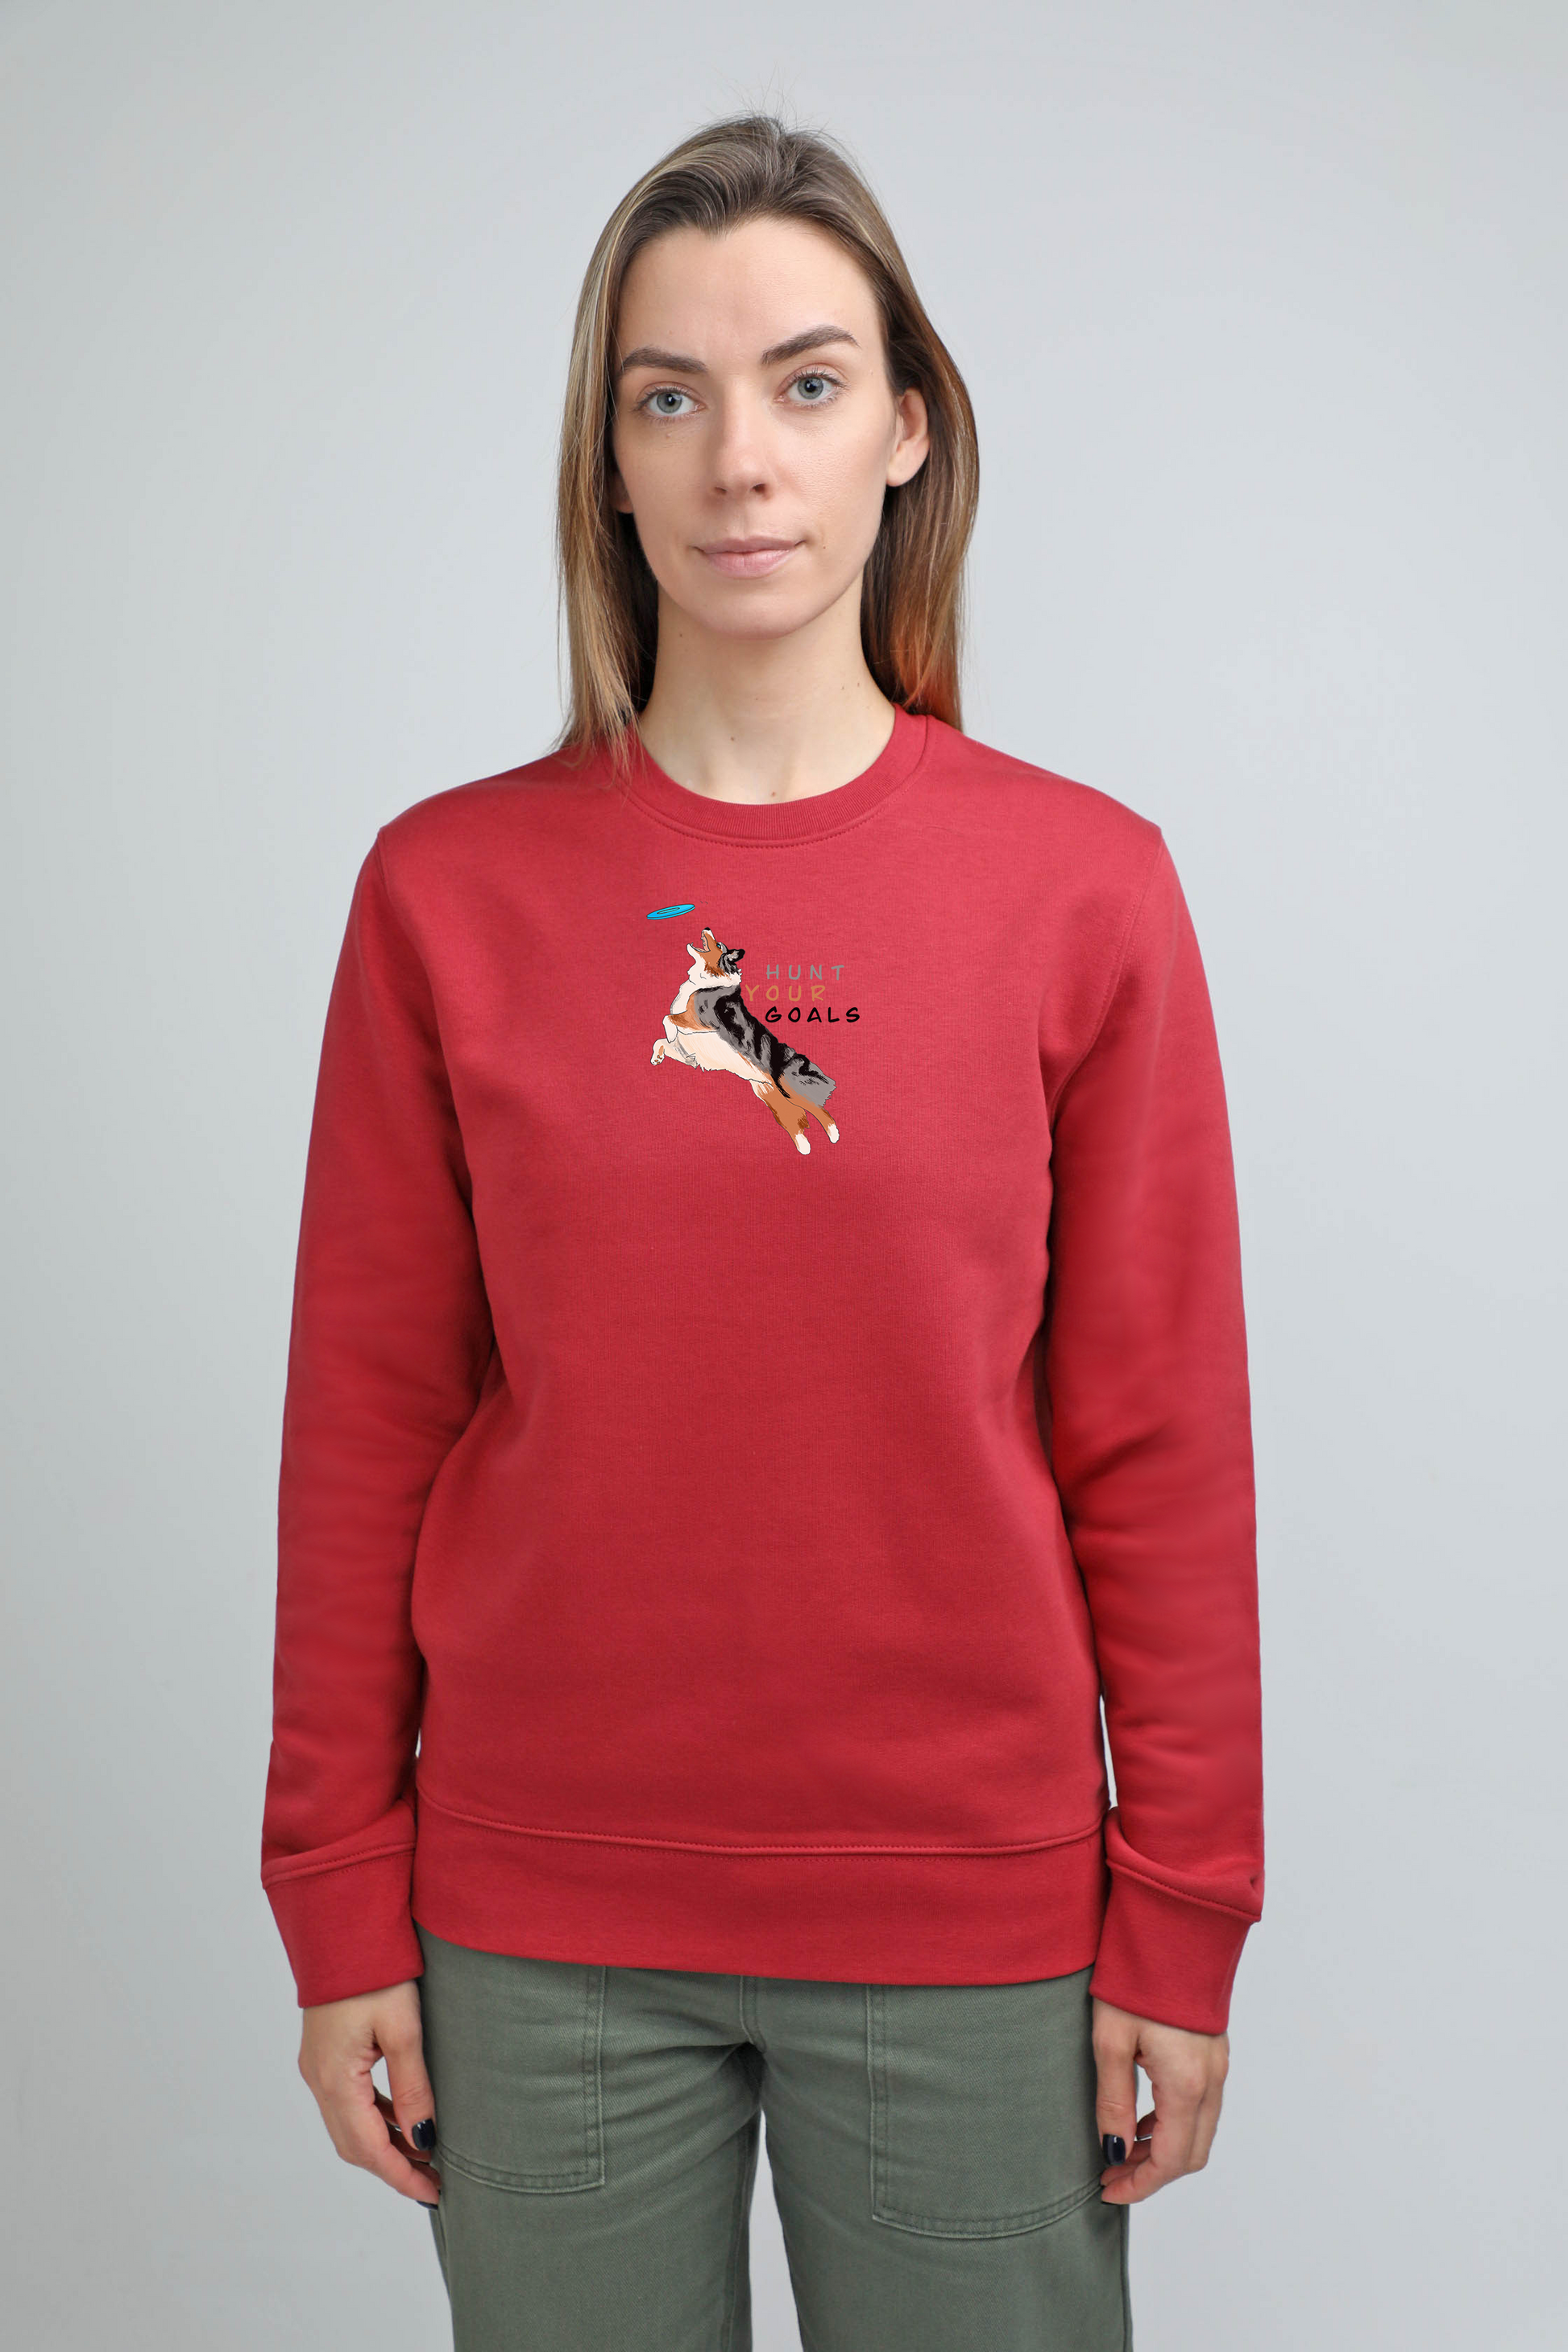 Hunt your goals | Crew neck sweatshirt with dog. Regular fit | Unisex by My Wild Other